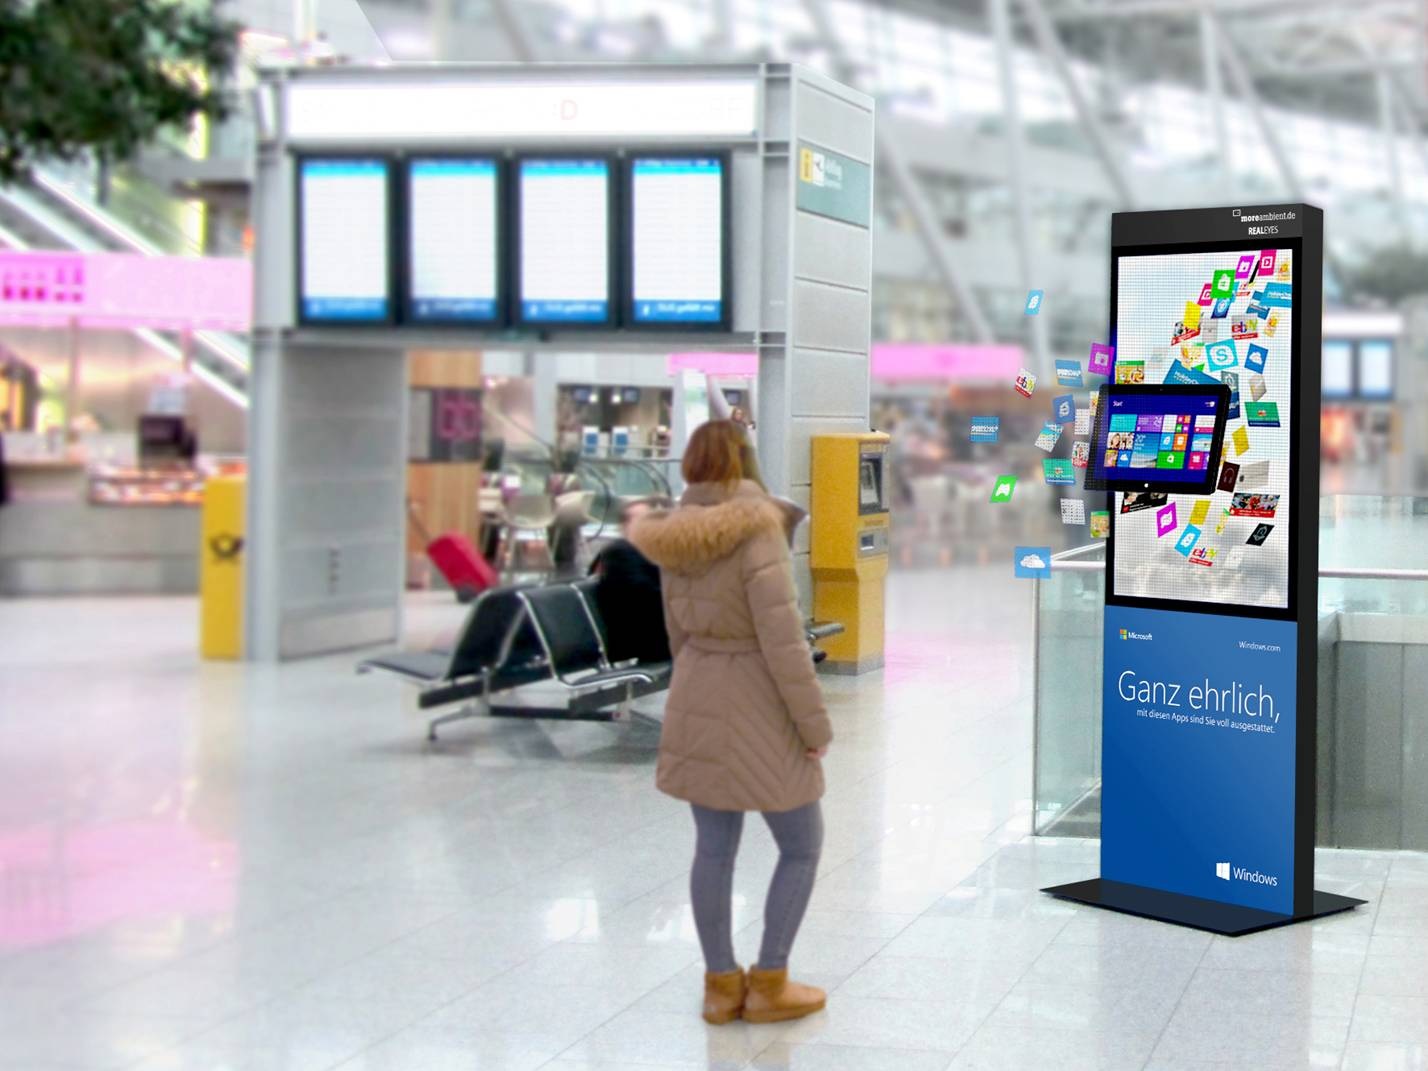 REALEYES Column with 3D display for Windows 8 at the airport of Duesseldorf.